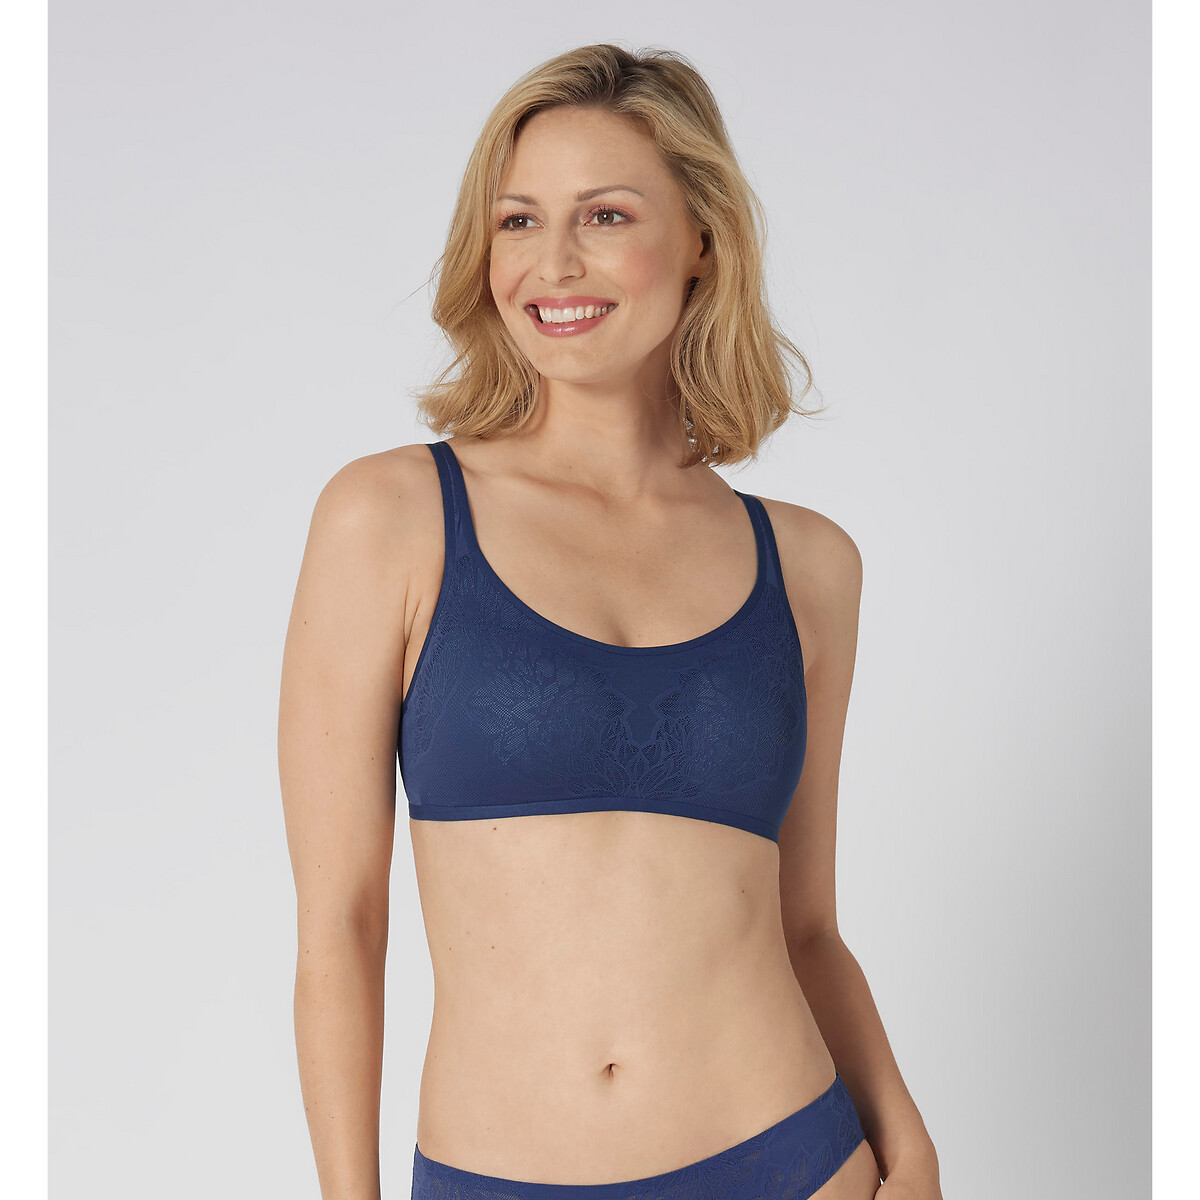 Fit Smart Padded Bra without Underwiring